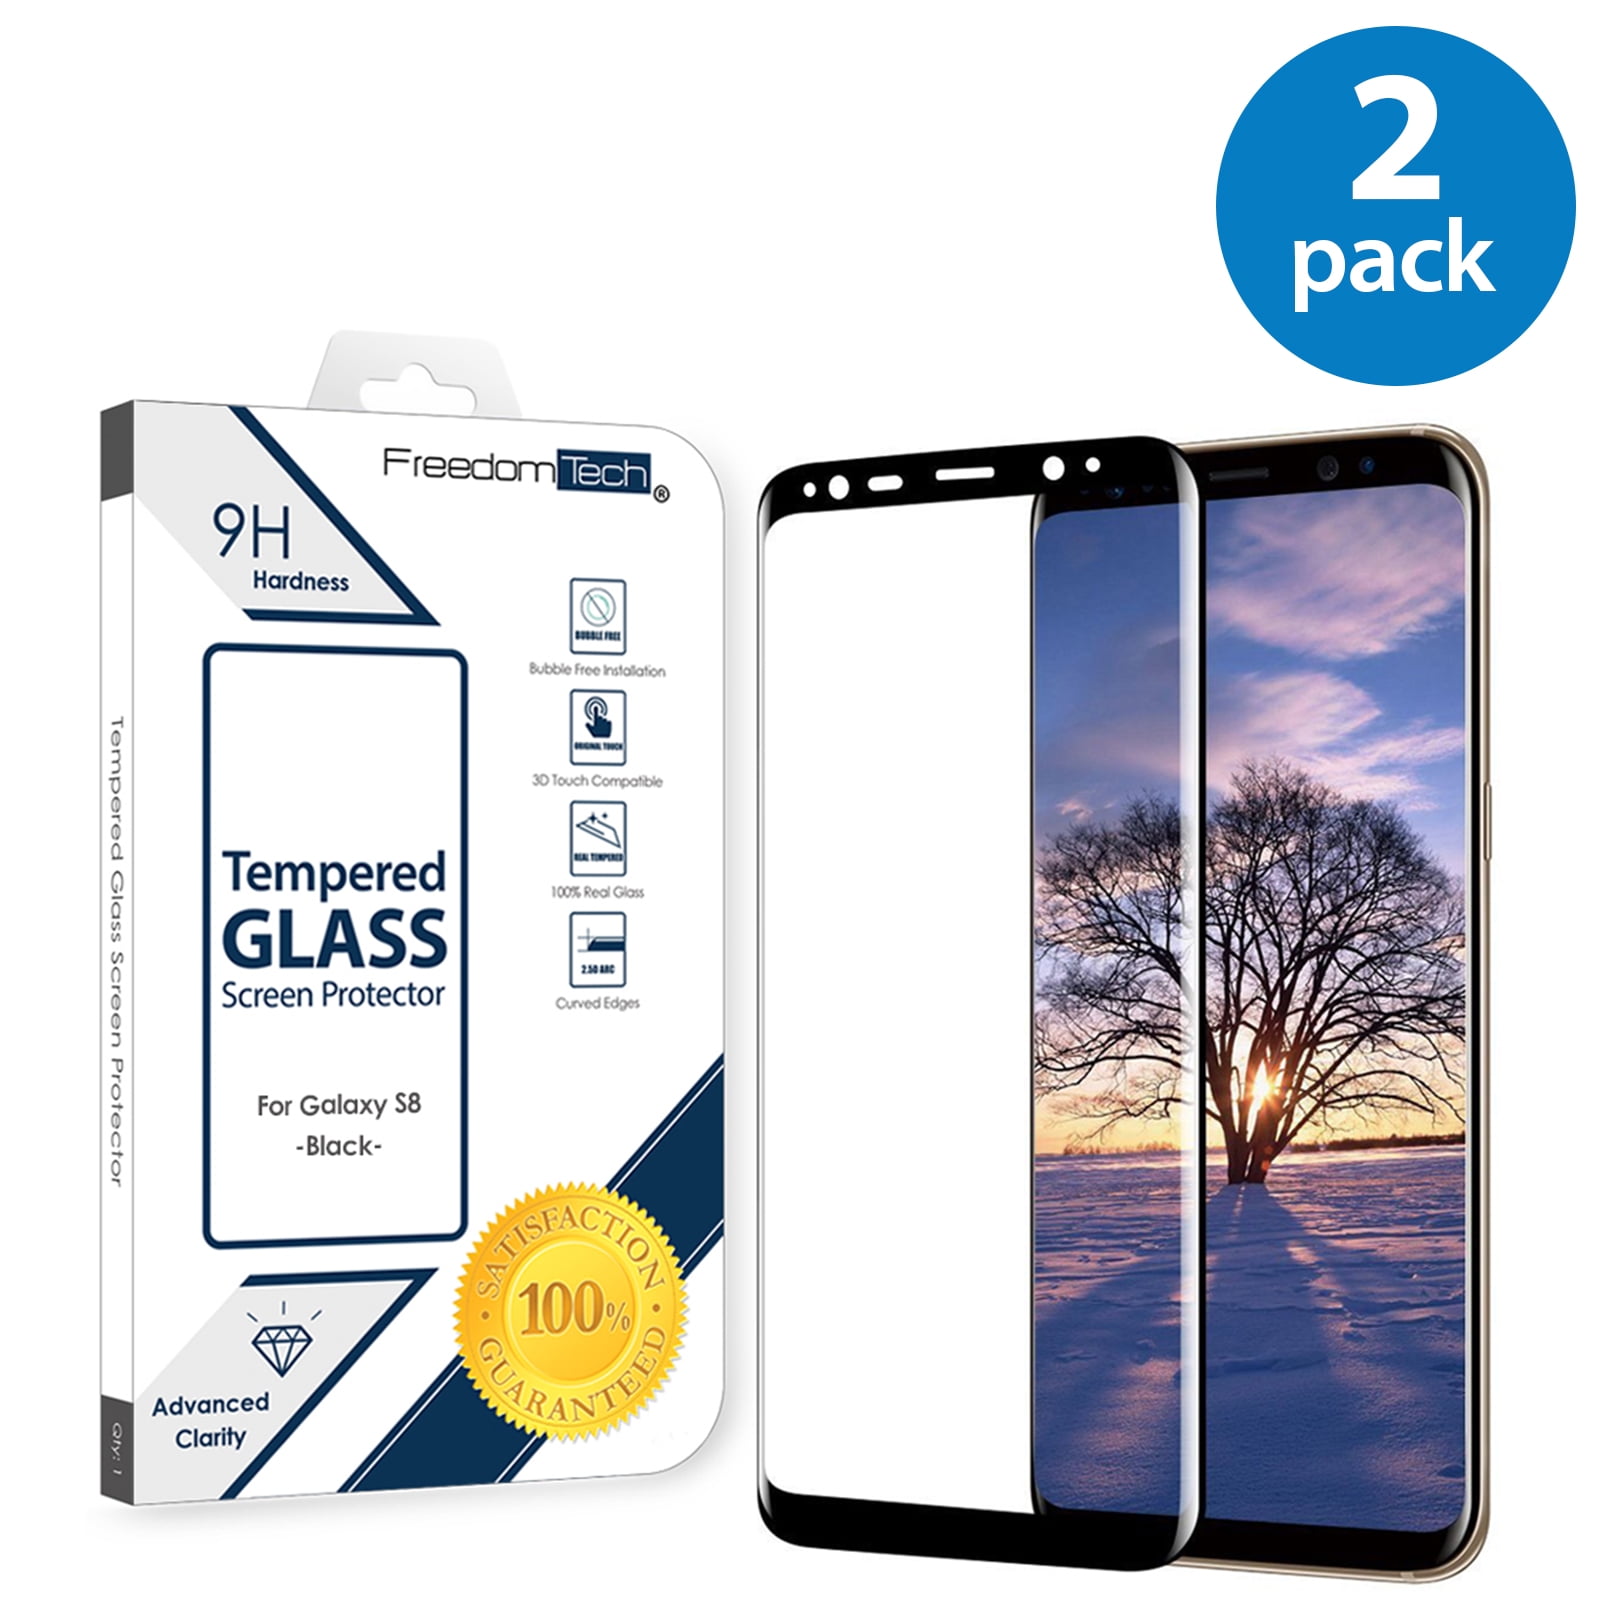 9H Hardness Case Friendly Anti-Bubble MSLAN Samsung Galaxy S8 Screen Protector,3D Curved Tempered Glass Screen Film Compatible Samsung Galaxy S8 Black Anti-Scratch HD Clear 2 Pack